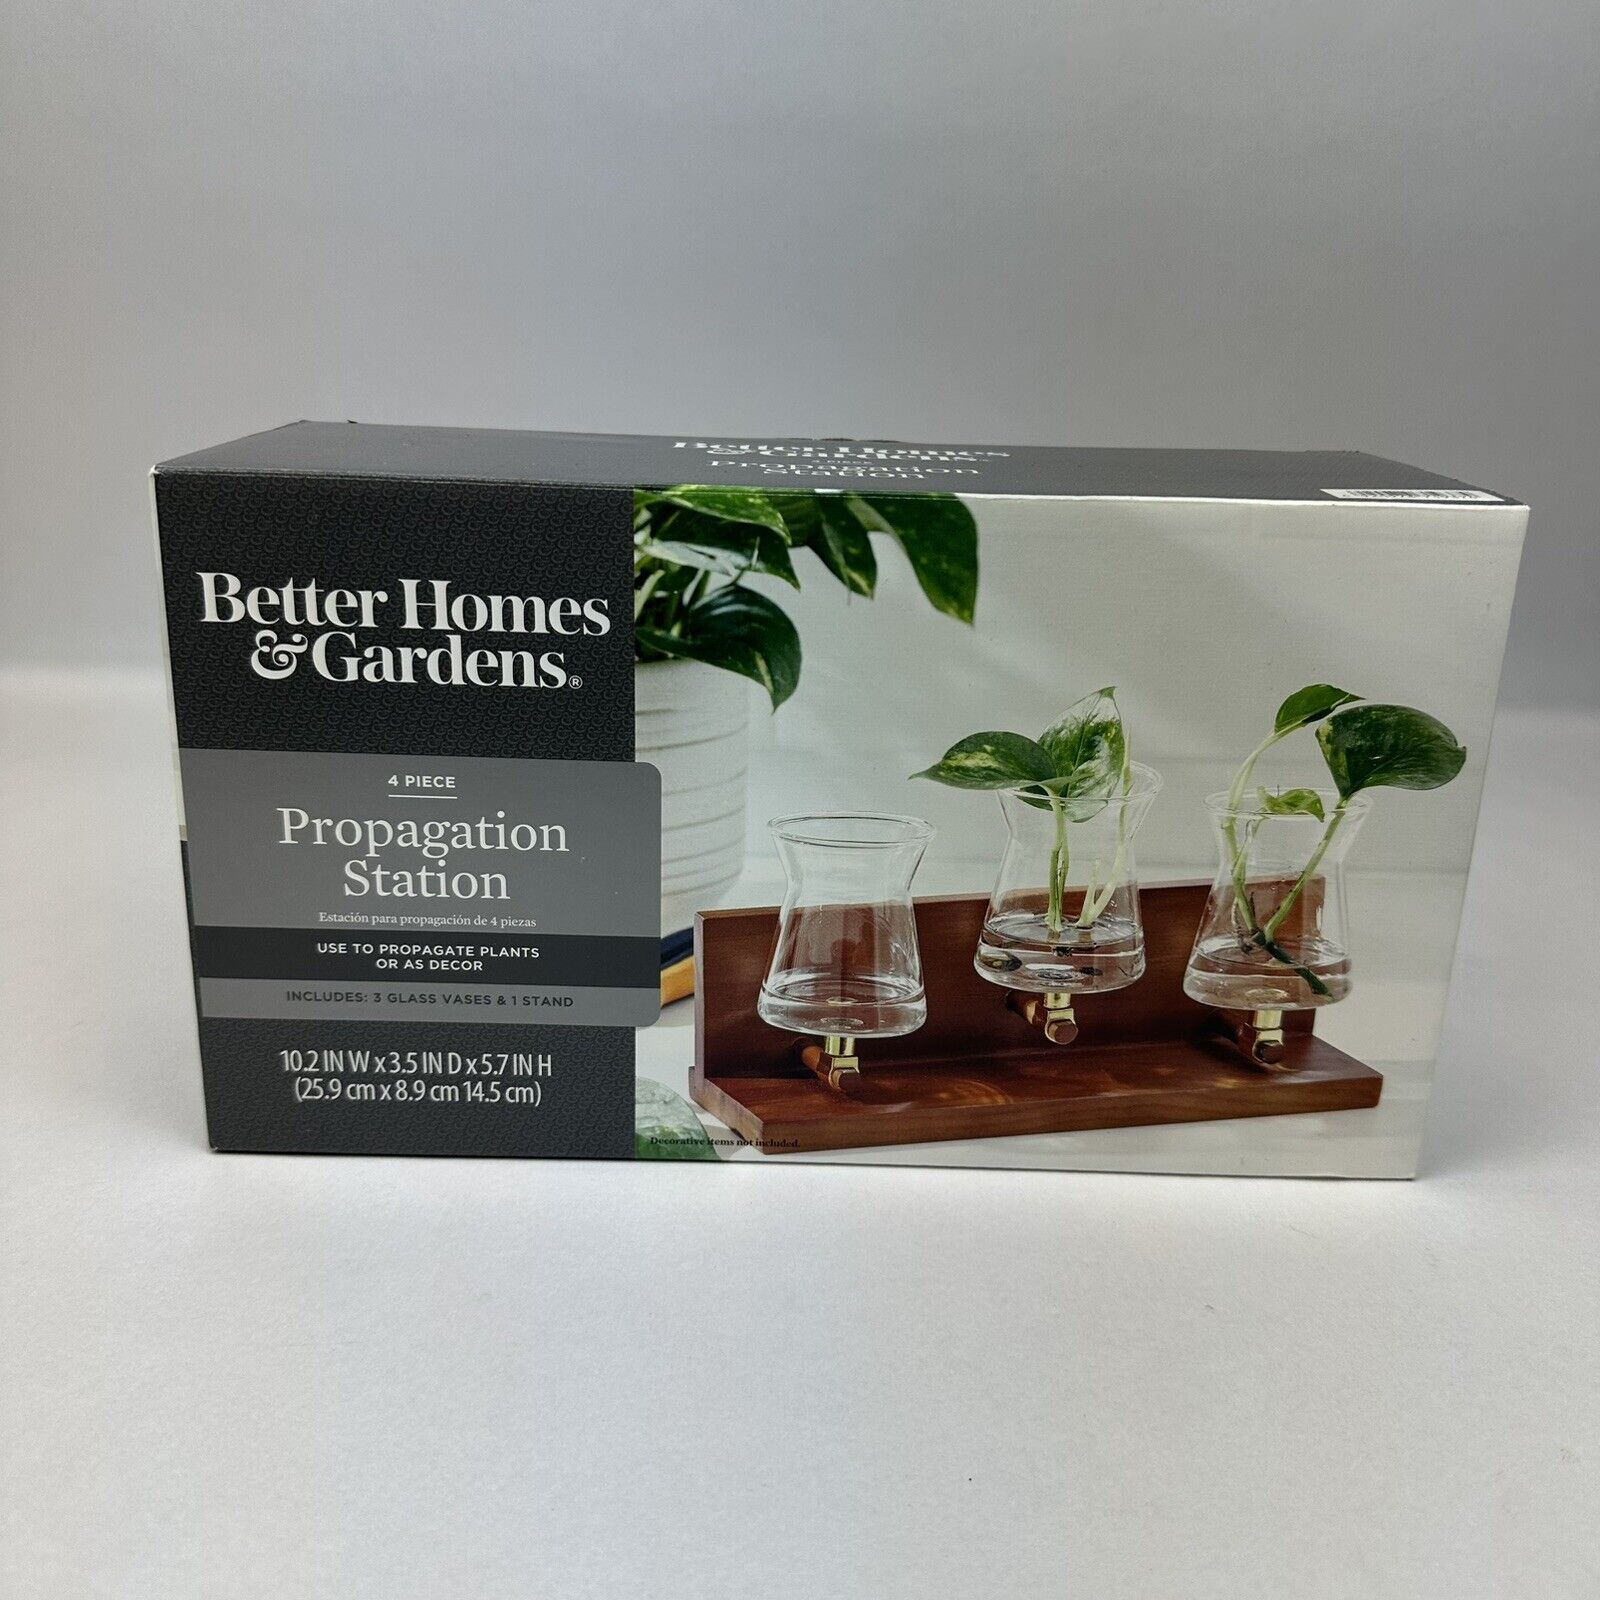 Better Homes & Gardens 4 pc Propagation Station 3 Glass Vases with Wood Stand